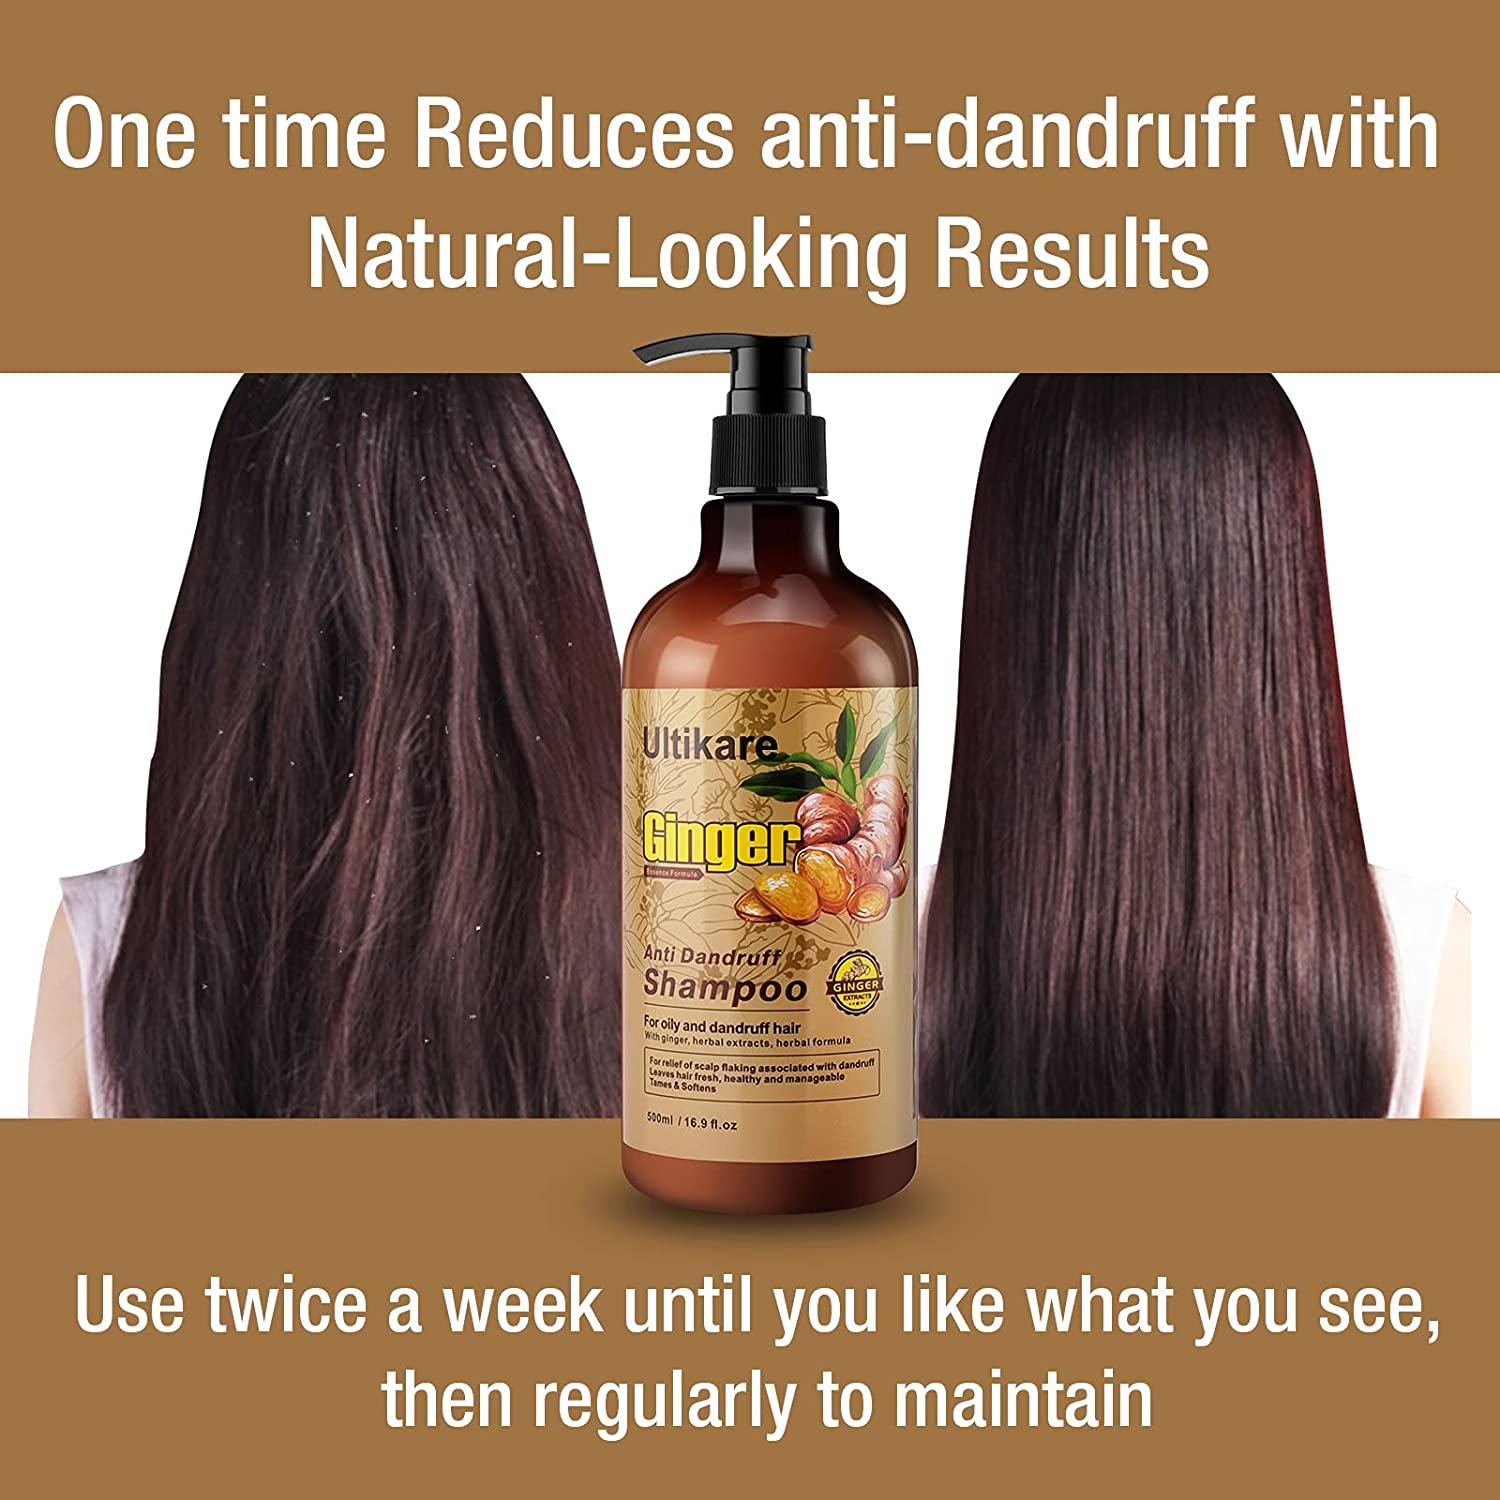 Dandruff Shampoo, Ultikare Itchy Dry Scalp Treats & Anti-Dandruff, Deep  Nourishment Daily Use Care, Anti-Dandruff Treatment with Ginger, Deep Clean  for Dry, Frizzy or Curly, Color-Treated Hair for Women & Men 